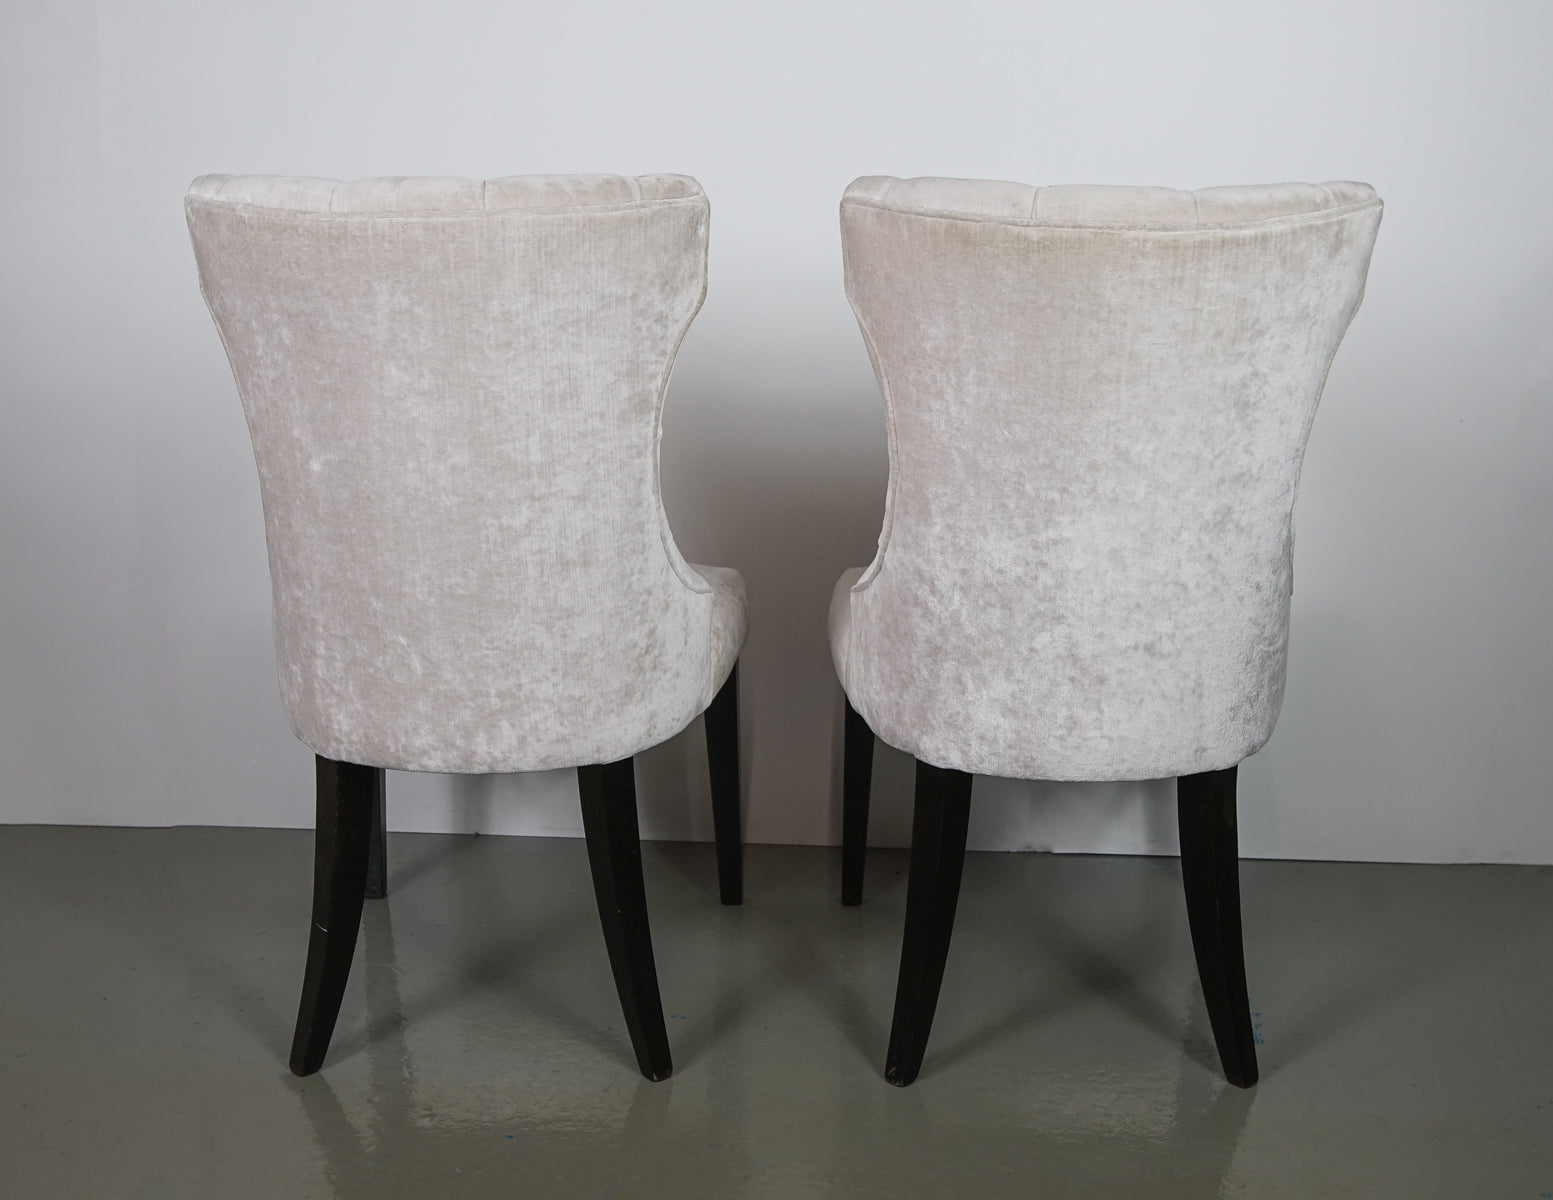 Harrods Occasional Chairs (2 units)